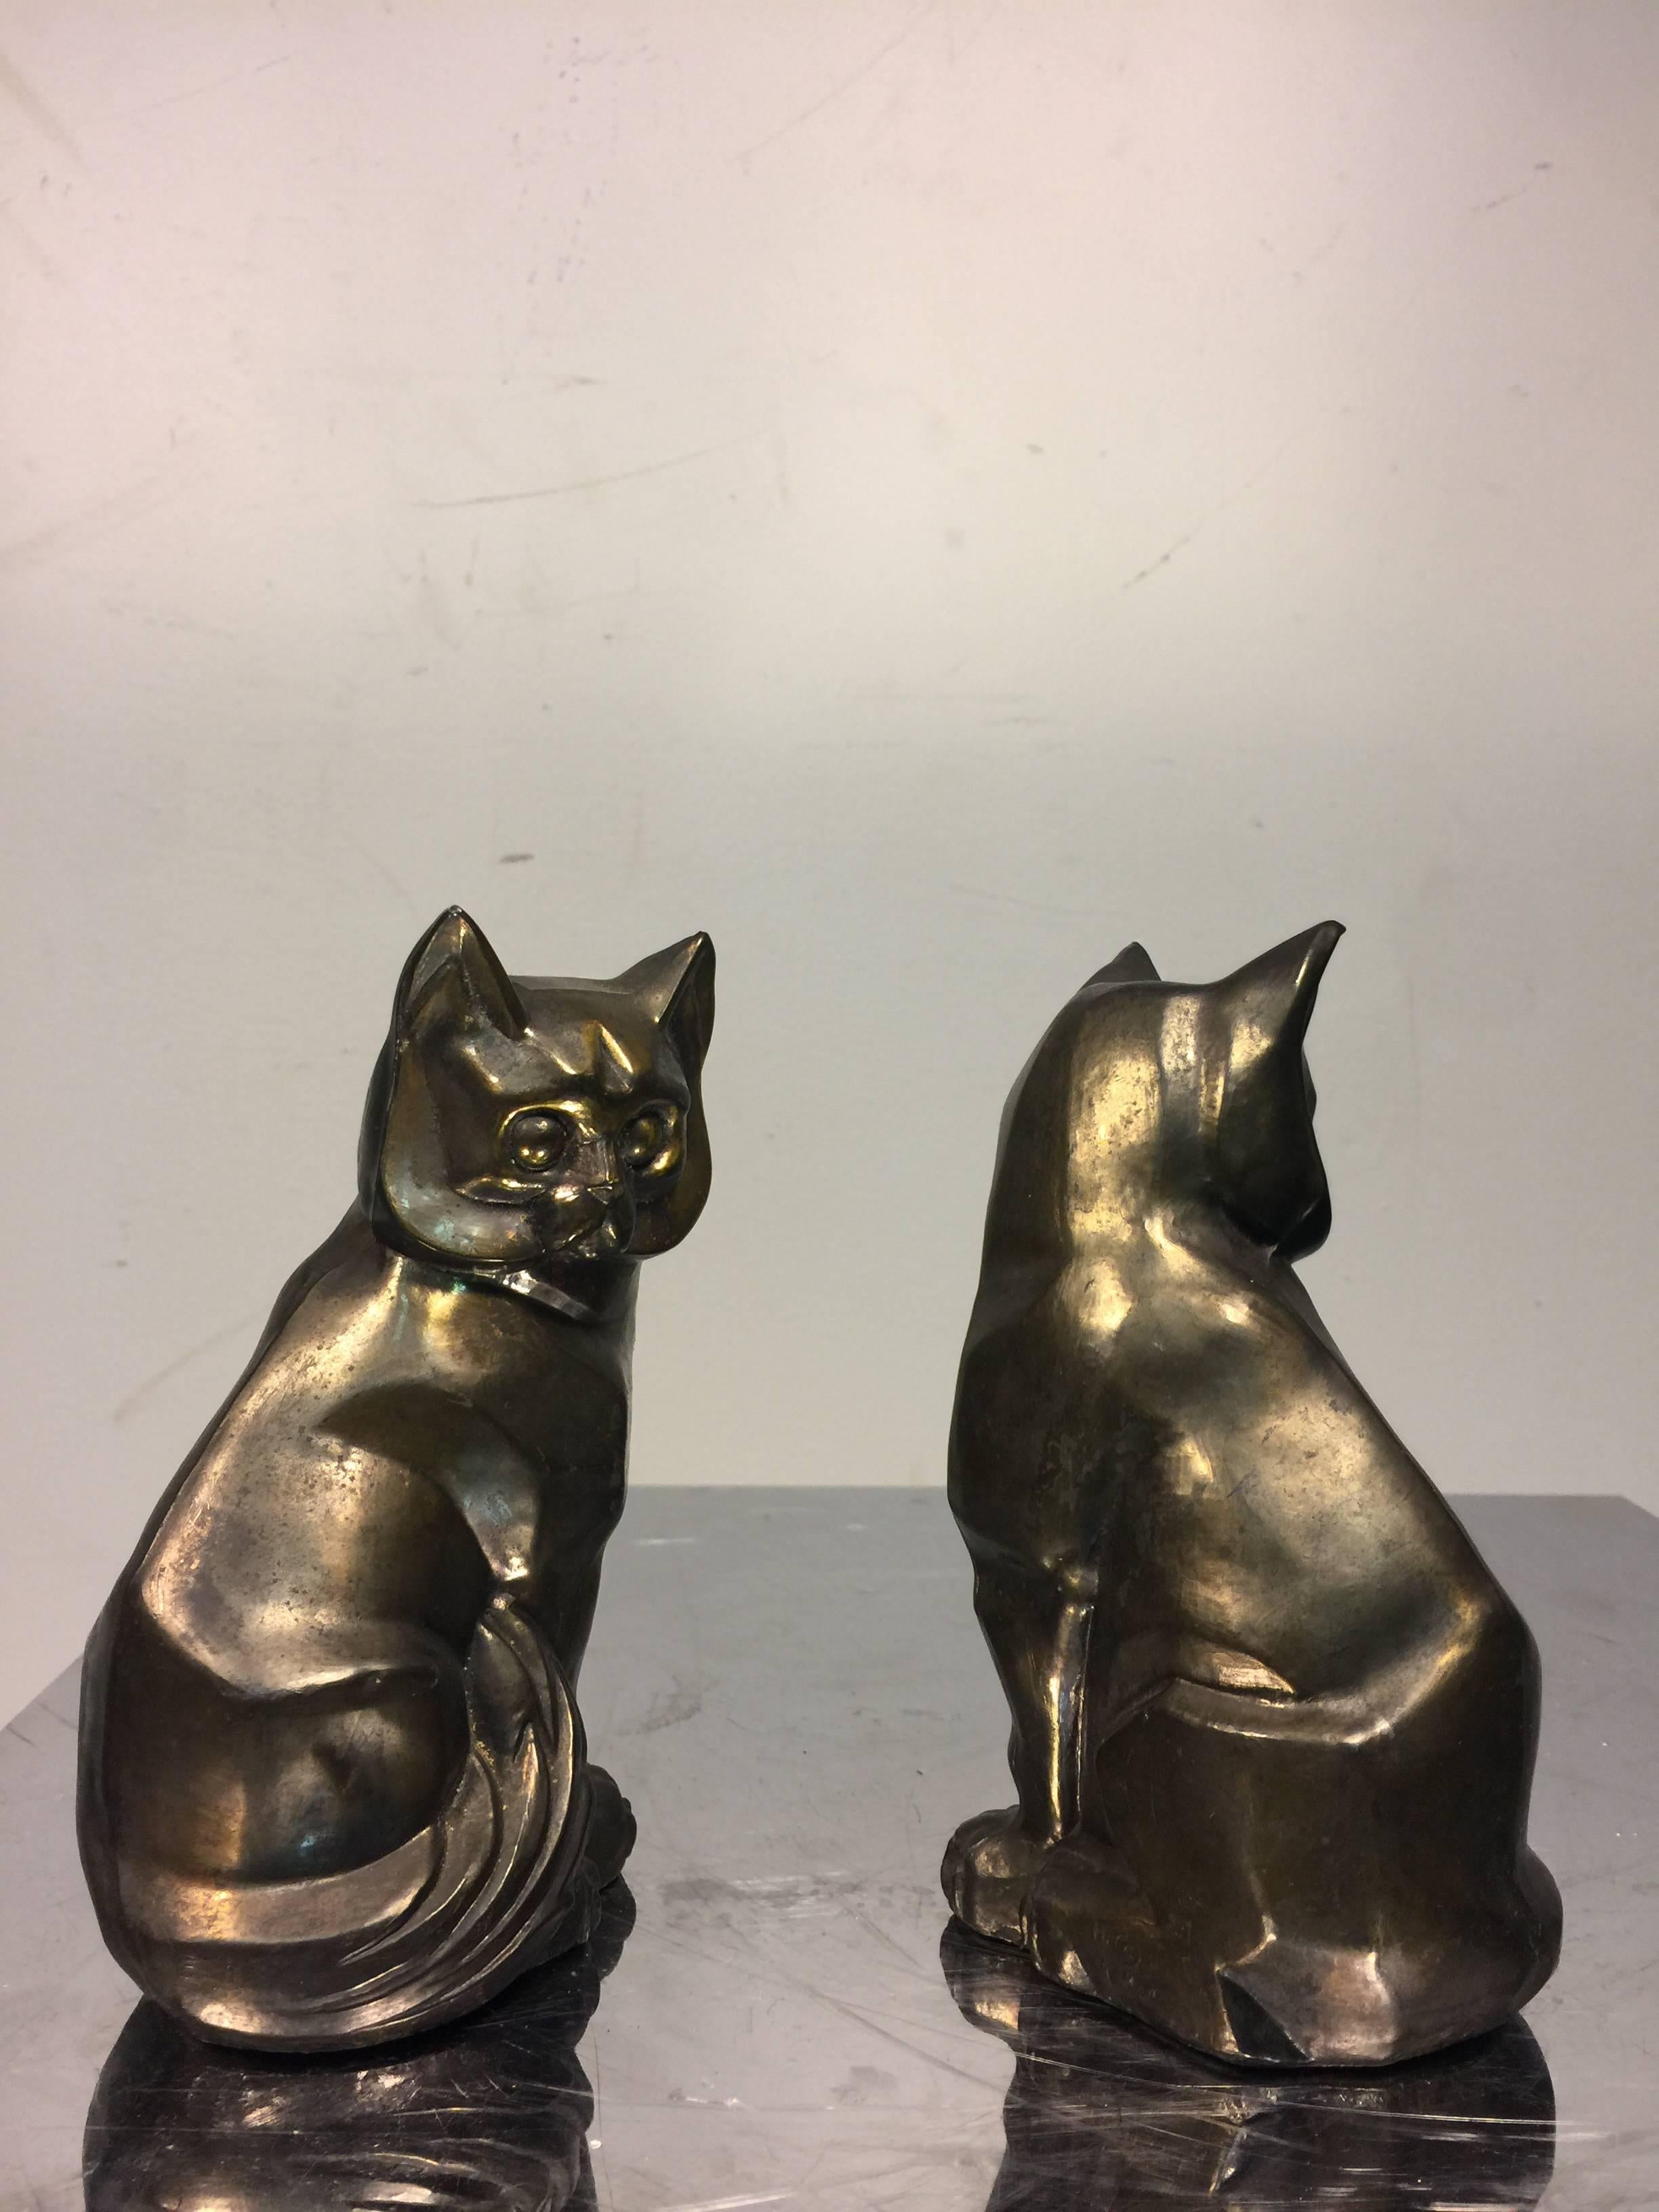 A terrific pair of Art Deco style cast metal cubist cat form bookends, circa 1970. Good condition with age appropriate wear.